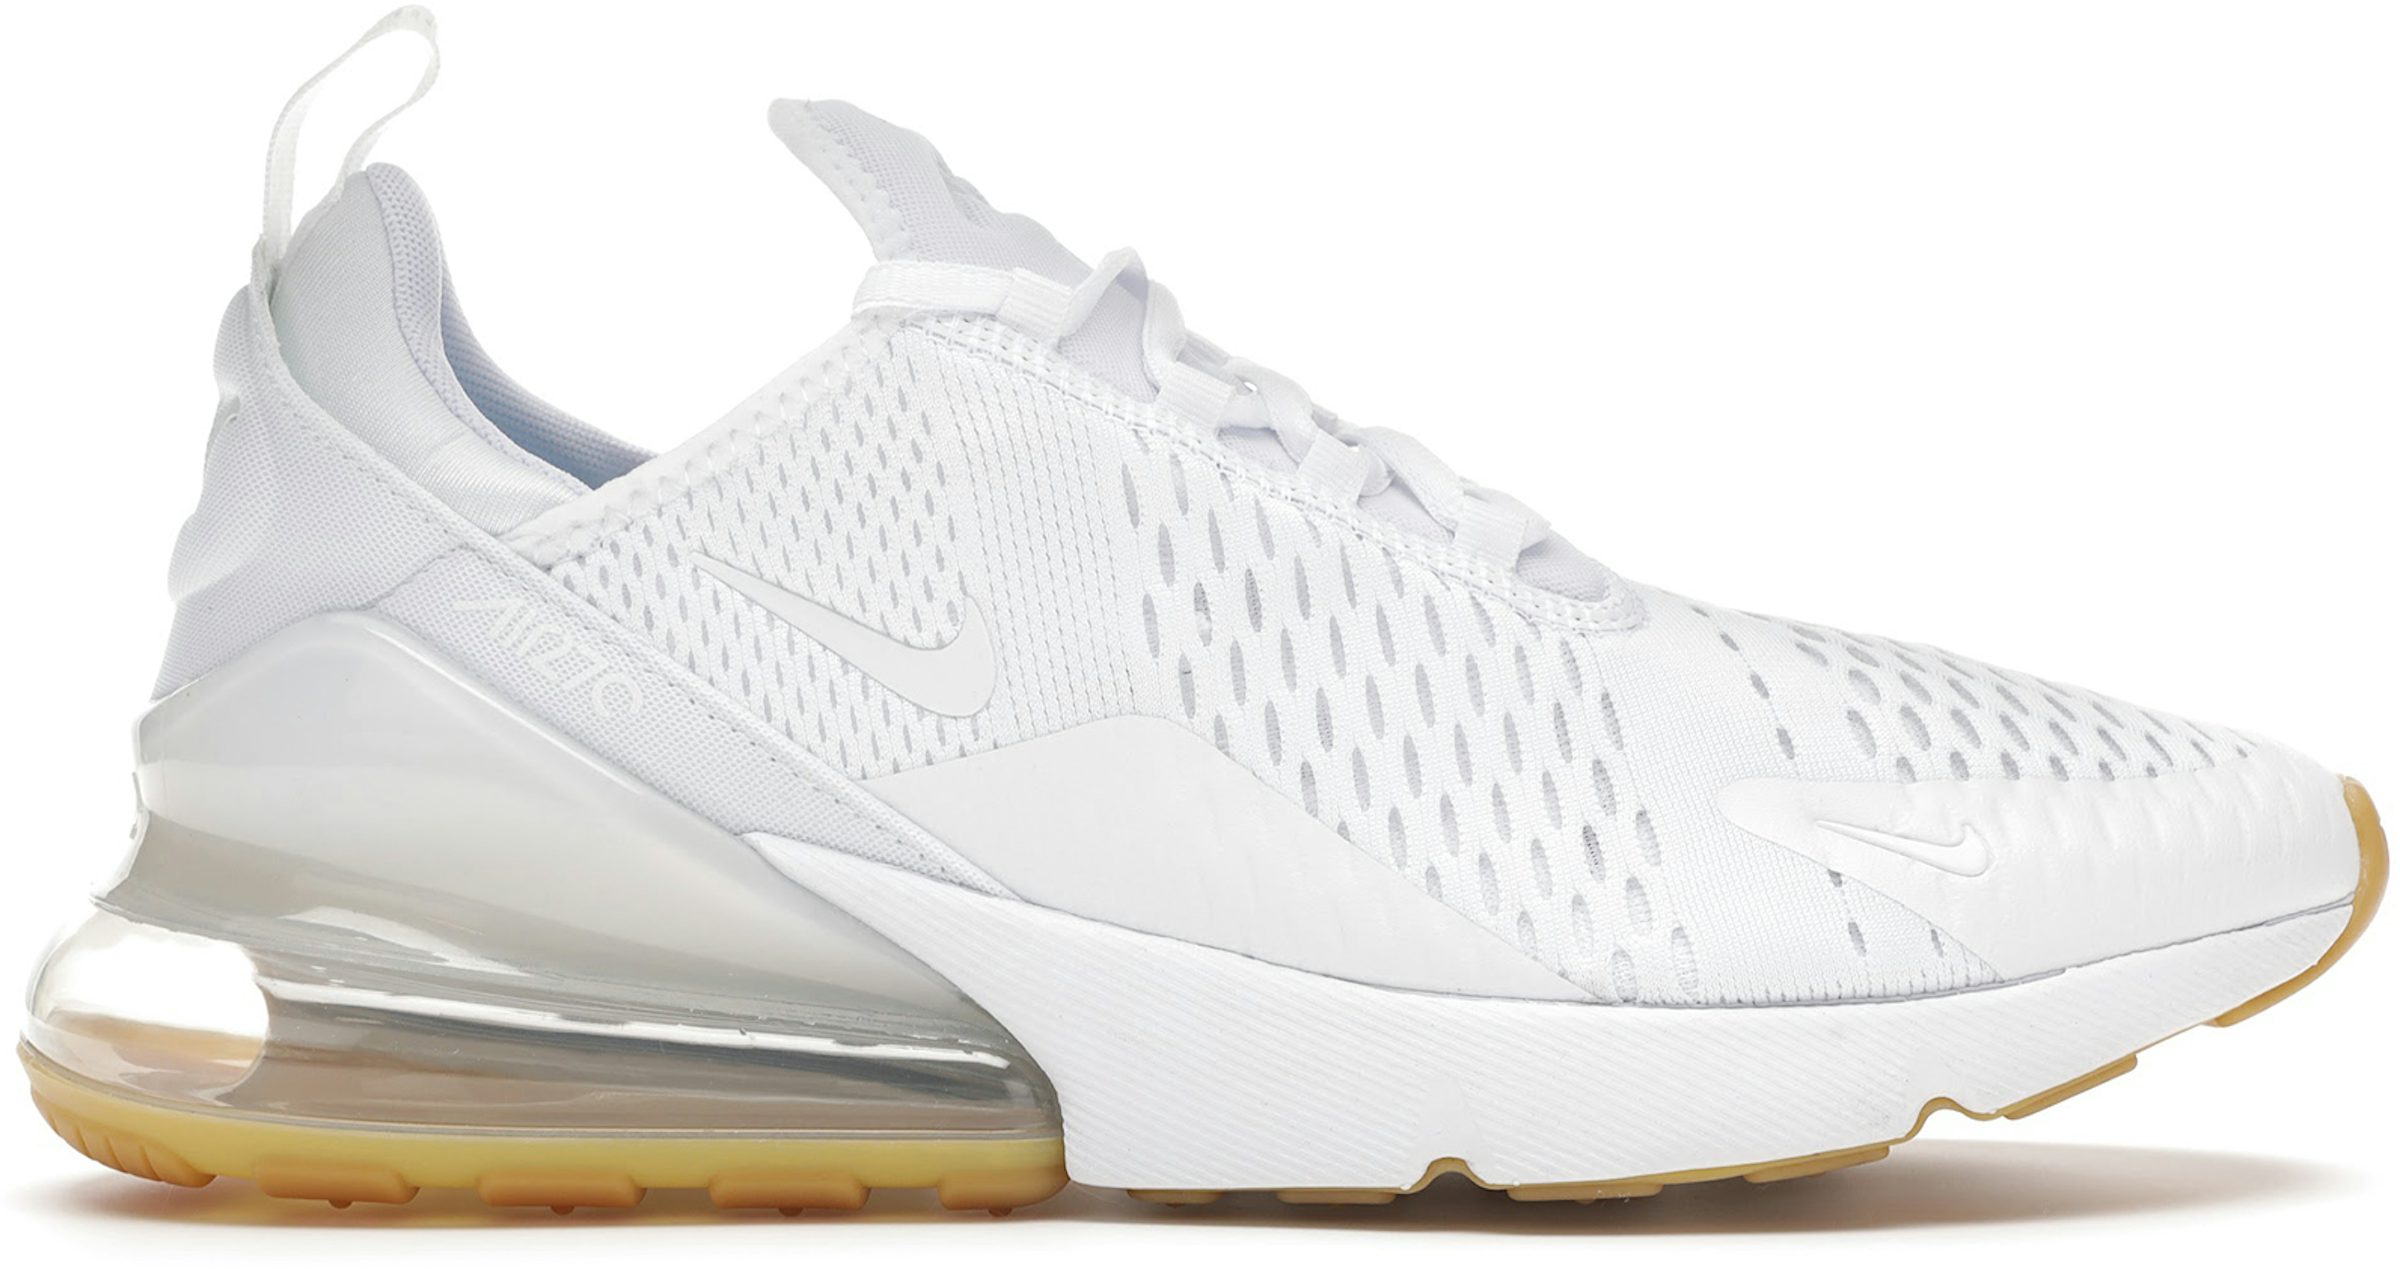 Nike Air Max 270 White And Black Gold | ppgbbe.intranet.biologia.ufrj.br